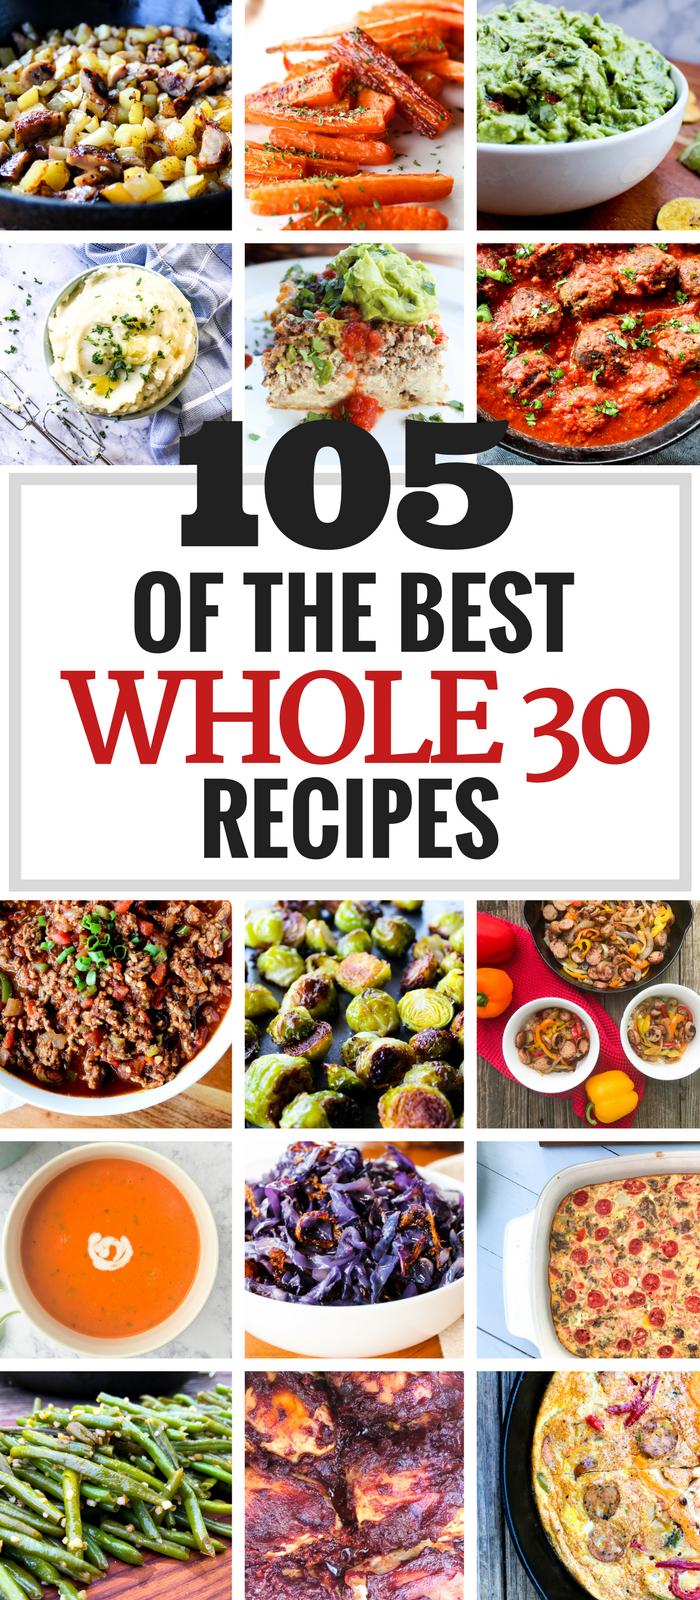 105 of the Best Whole30 Recipes via The Whole Cook